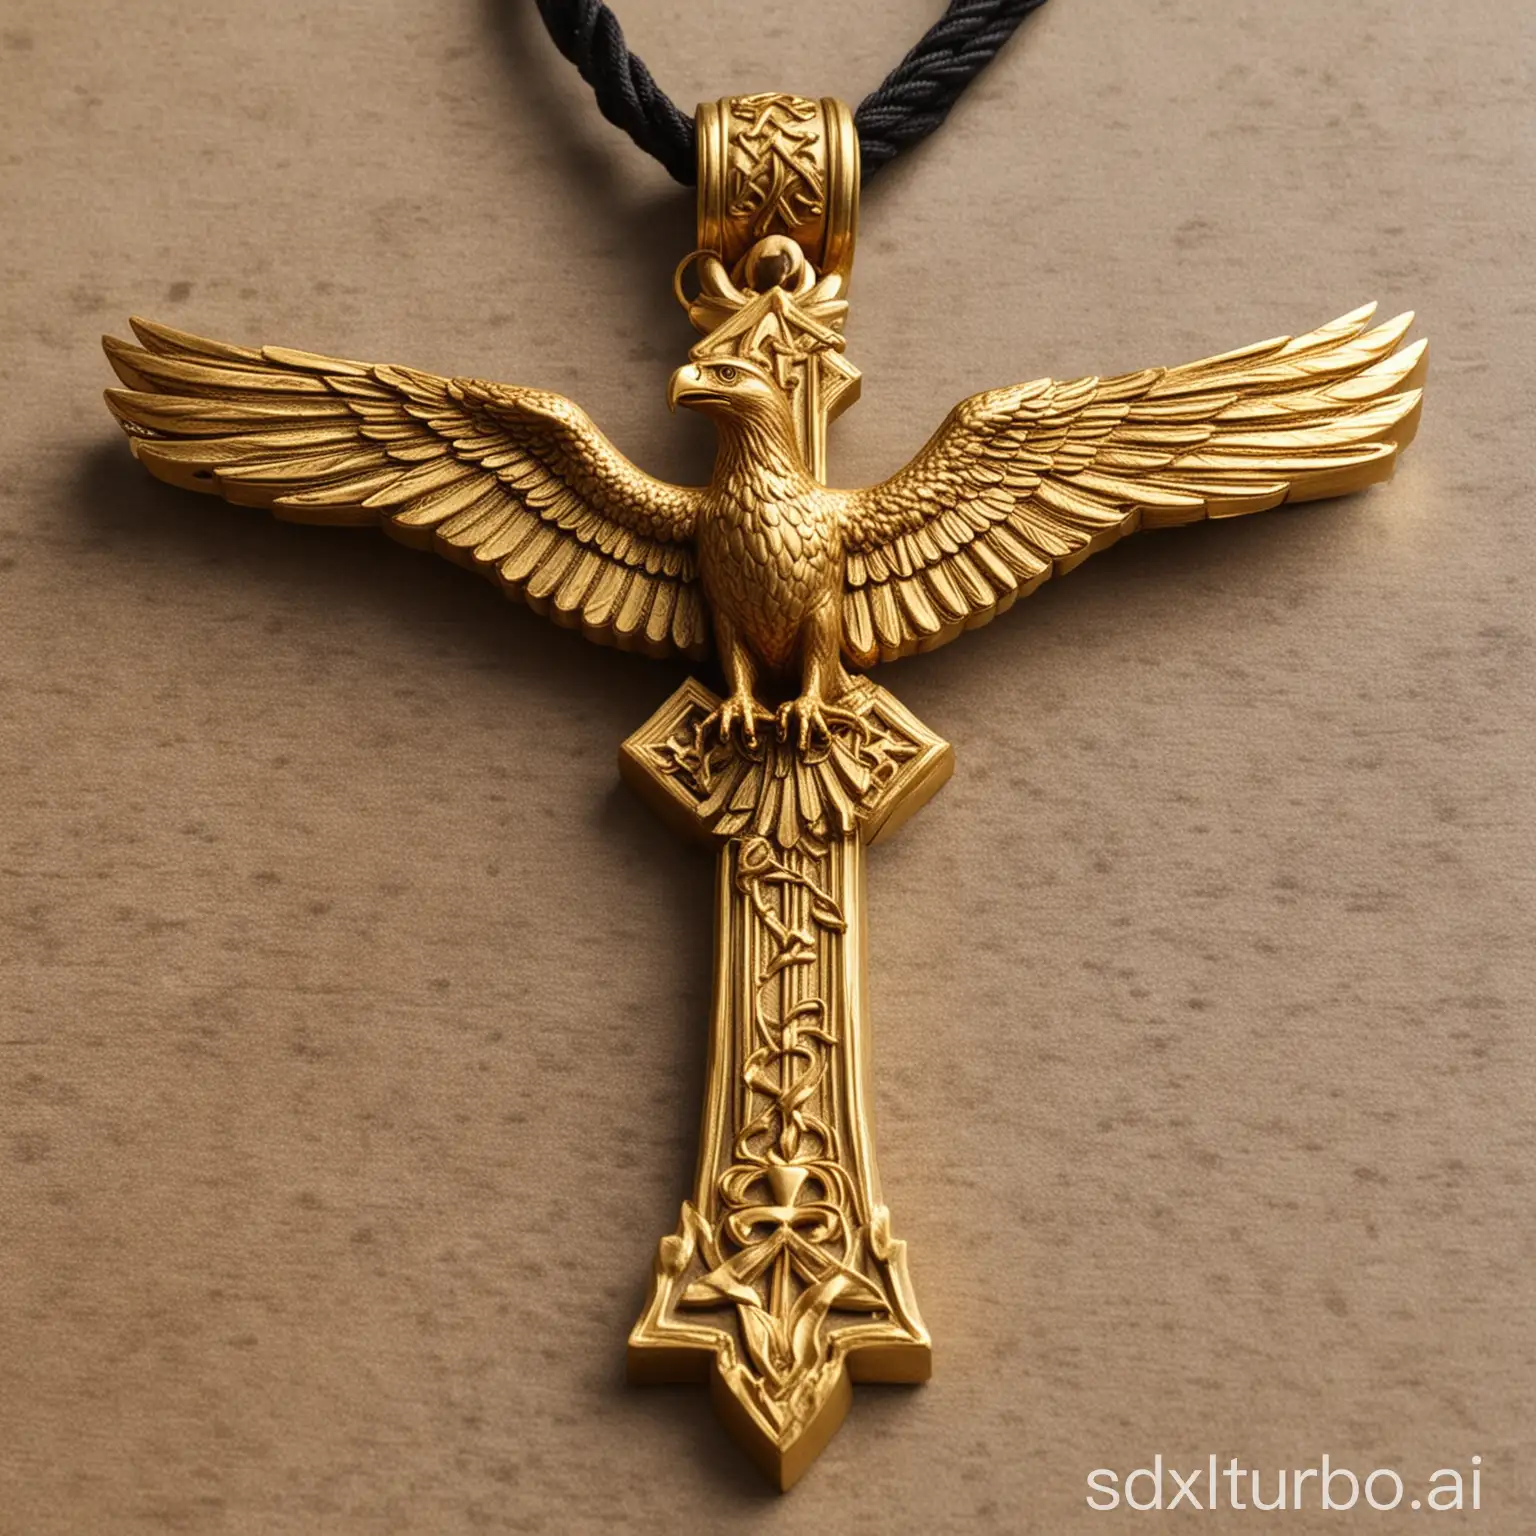 1 golden cross that goes in all directions is carried by an eagle